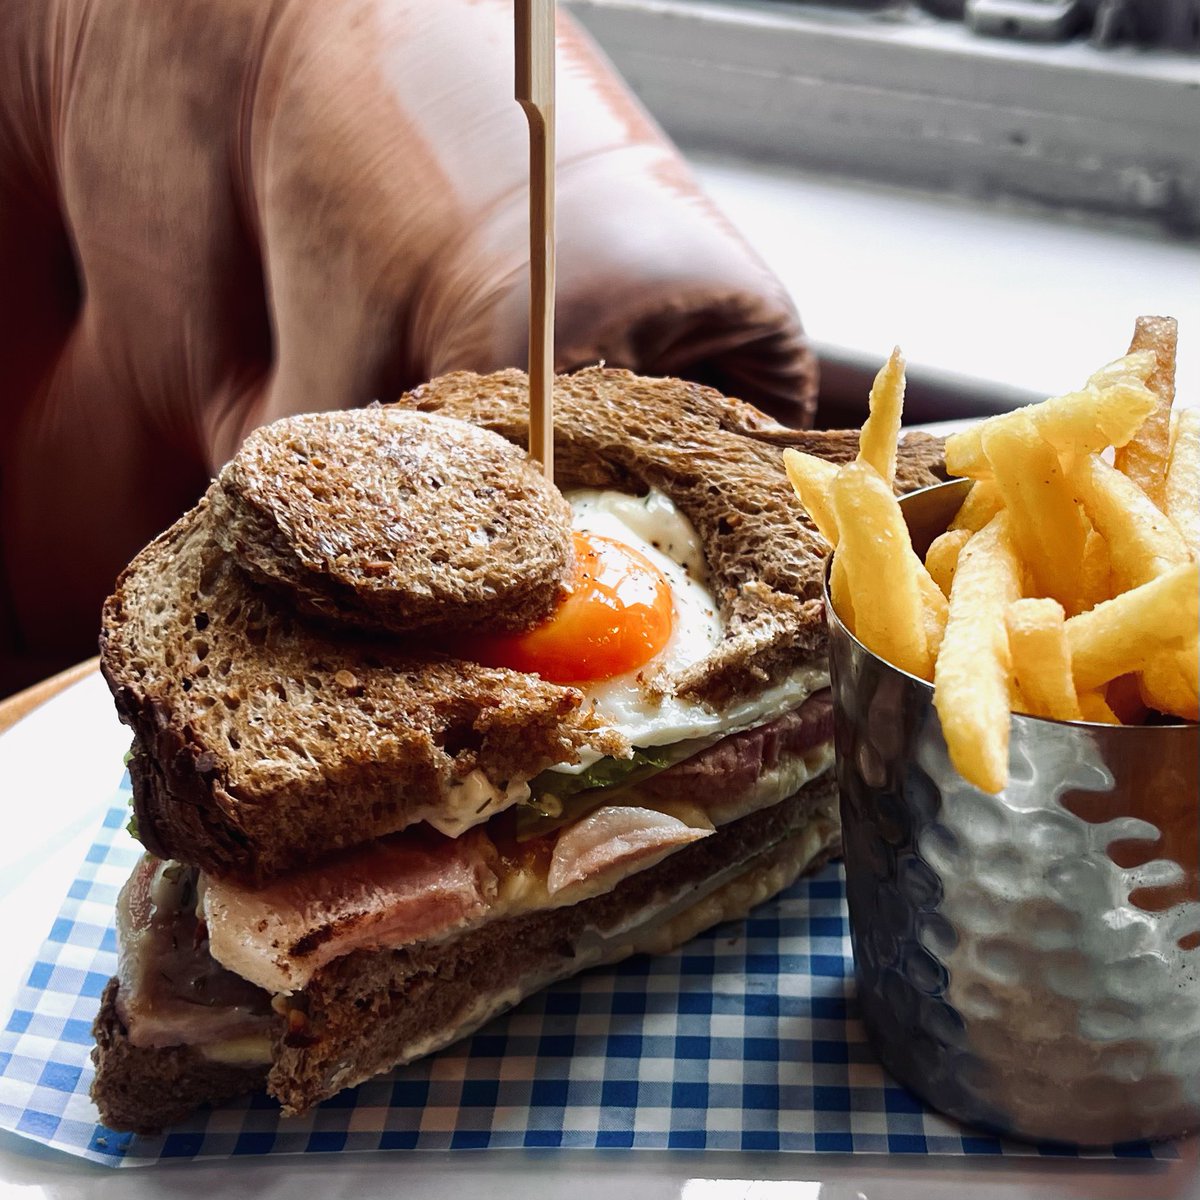 Needing a pick me up after the Bank Holiday weekend? Our brunch menu has you covered! Smoked gammon and fried egg sandwich, oozing cheddar cheese, a light drizzle of mustard, and salted-to-perfection fries 🤤 @youngspubs #brunch #bankholiday #recovery #dulwich #se26 #publife